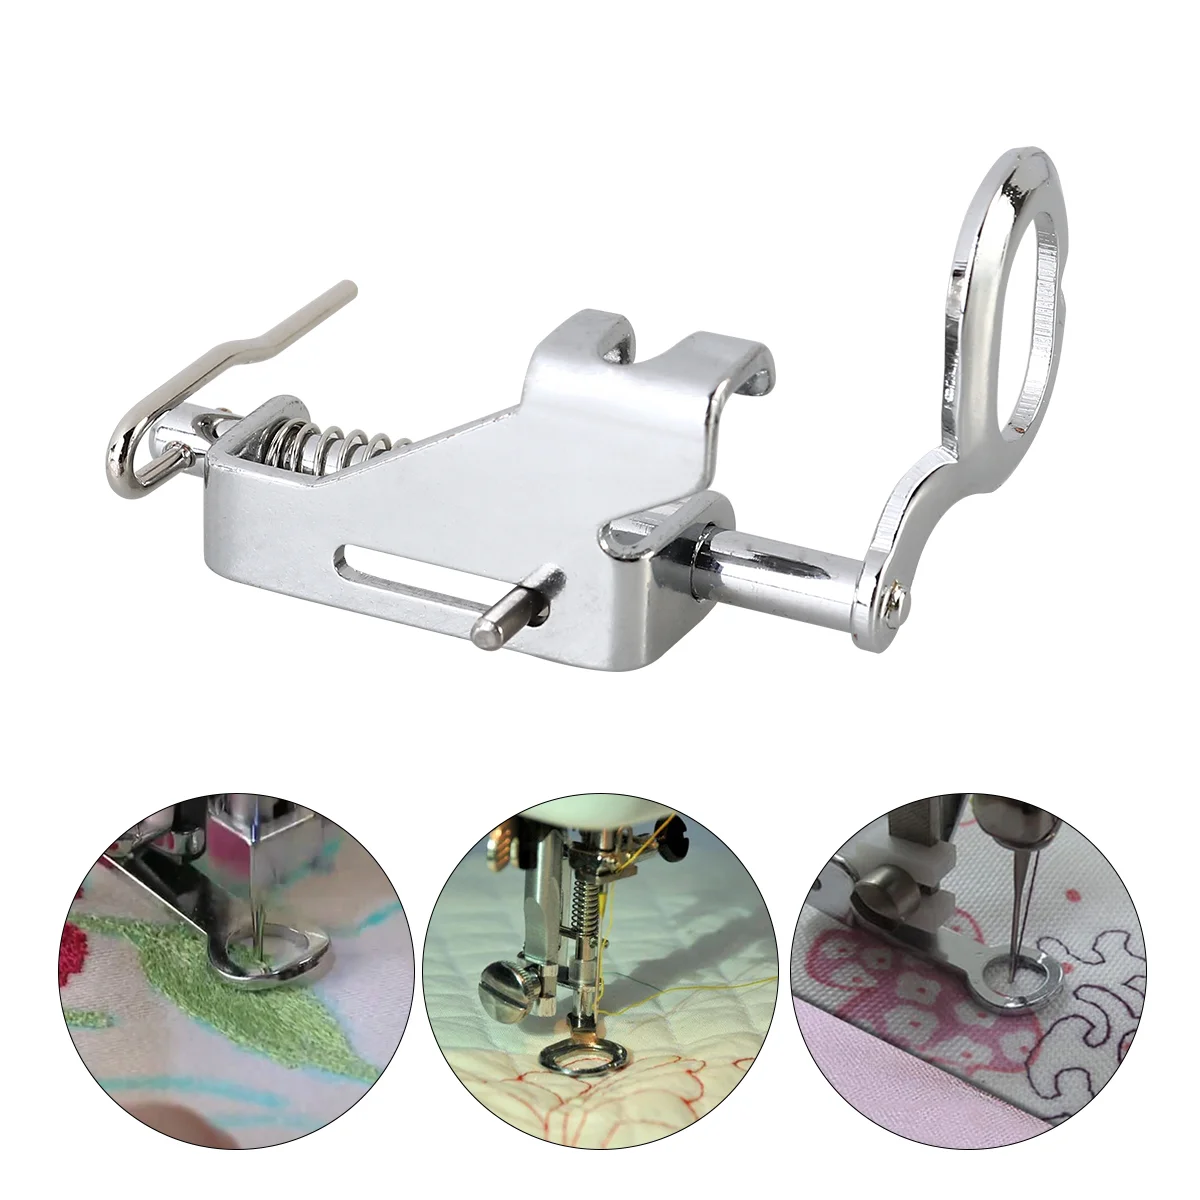 

Foot Presser Toe Sewing Darning Quilting Close Machine Accessories Low Free Feet Open Motion Spring Metal Large Replacement